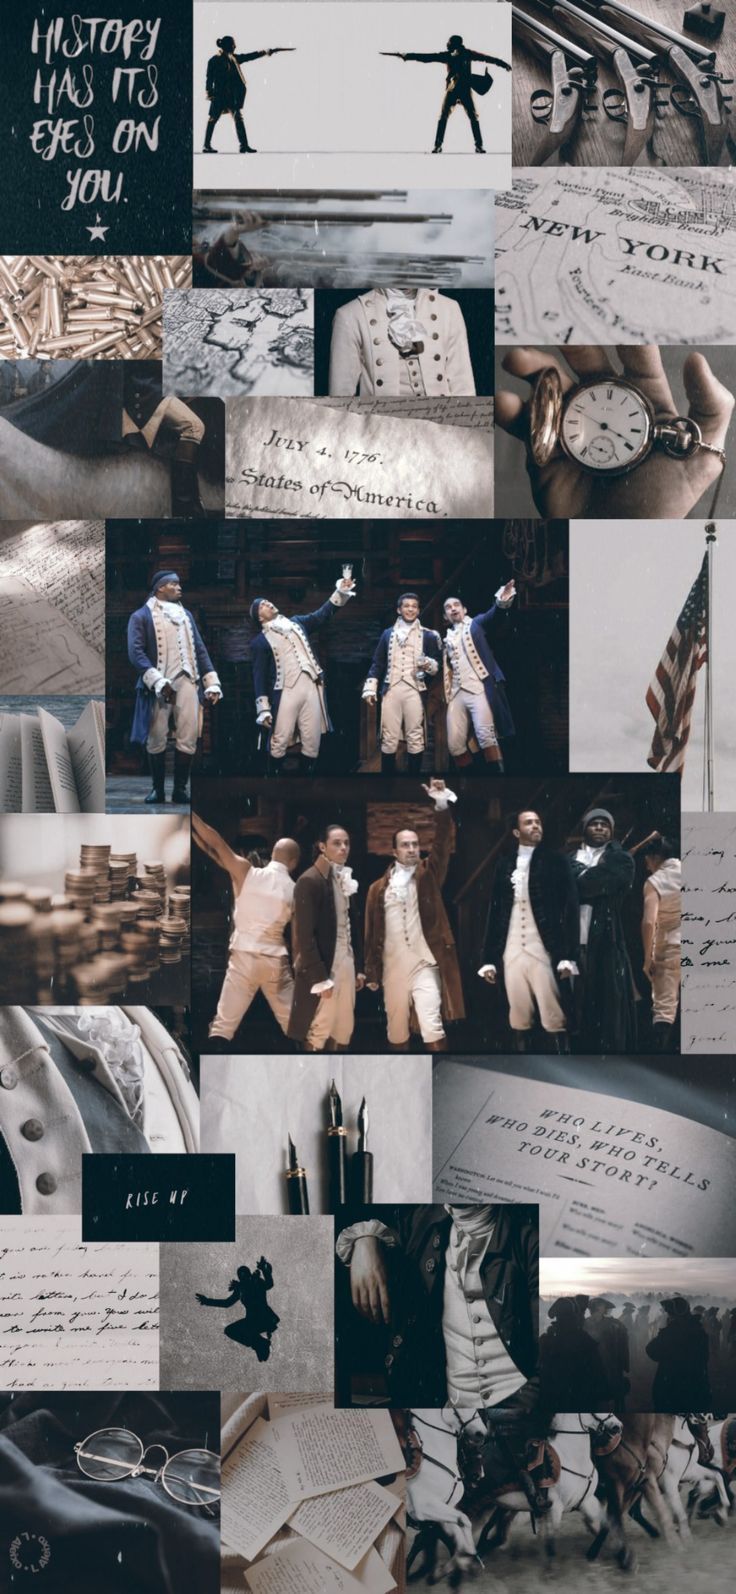 A collage of photos from the Hamilton Musical, including images of the cast and the stage. The background is a mix of black and white photos and images of the American flag. - Hamilton